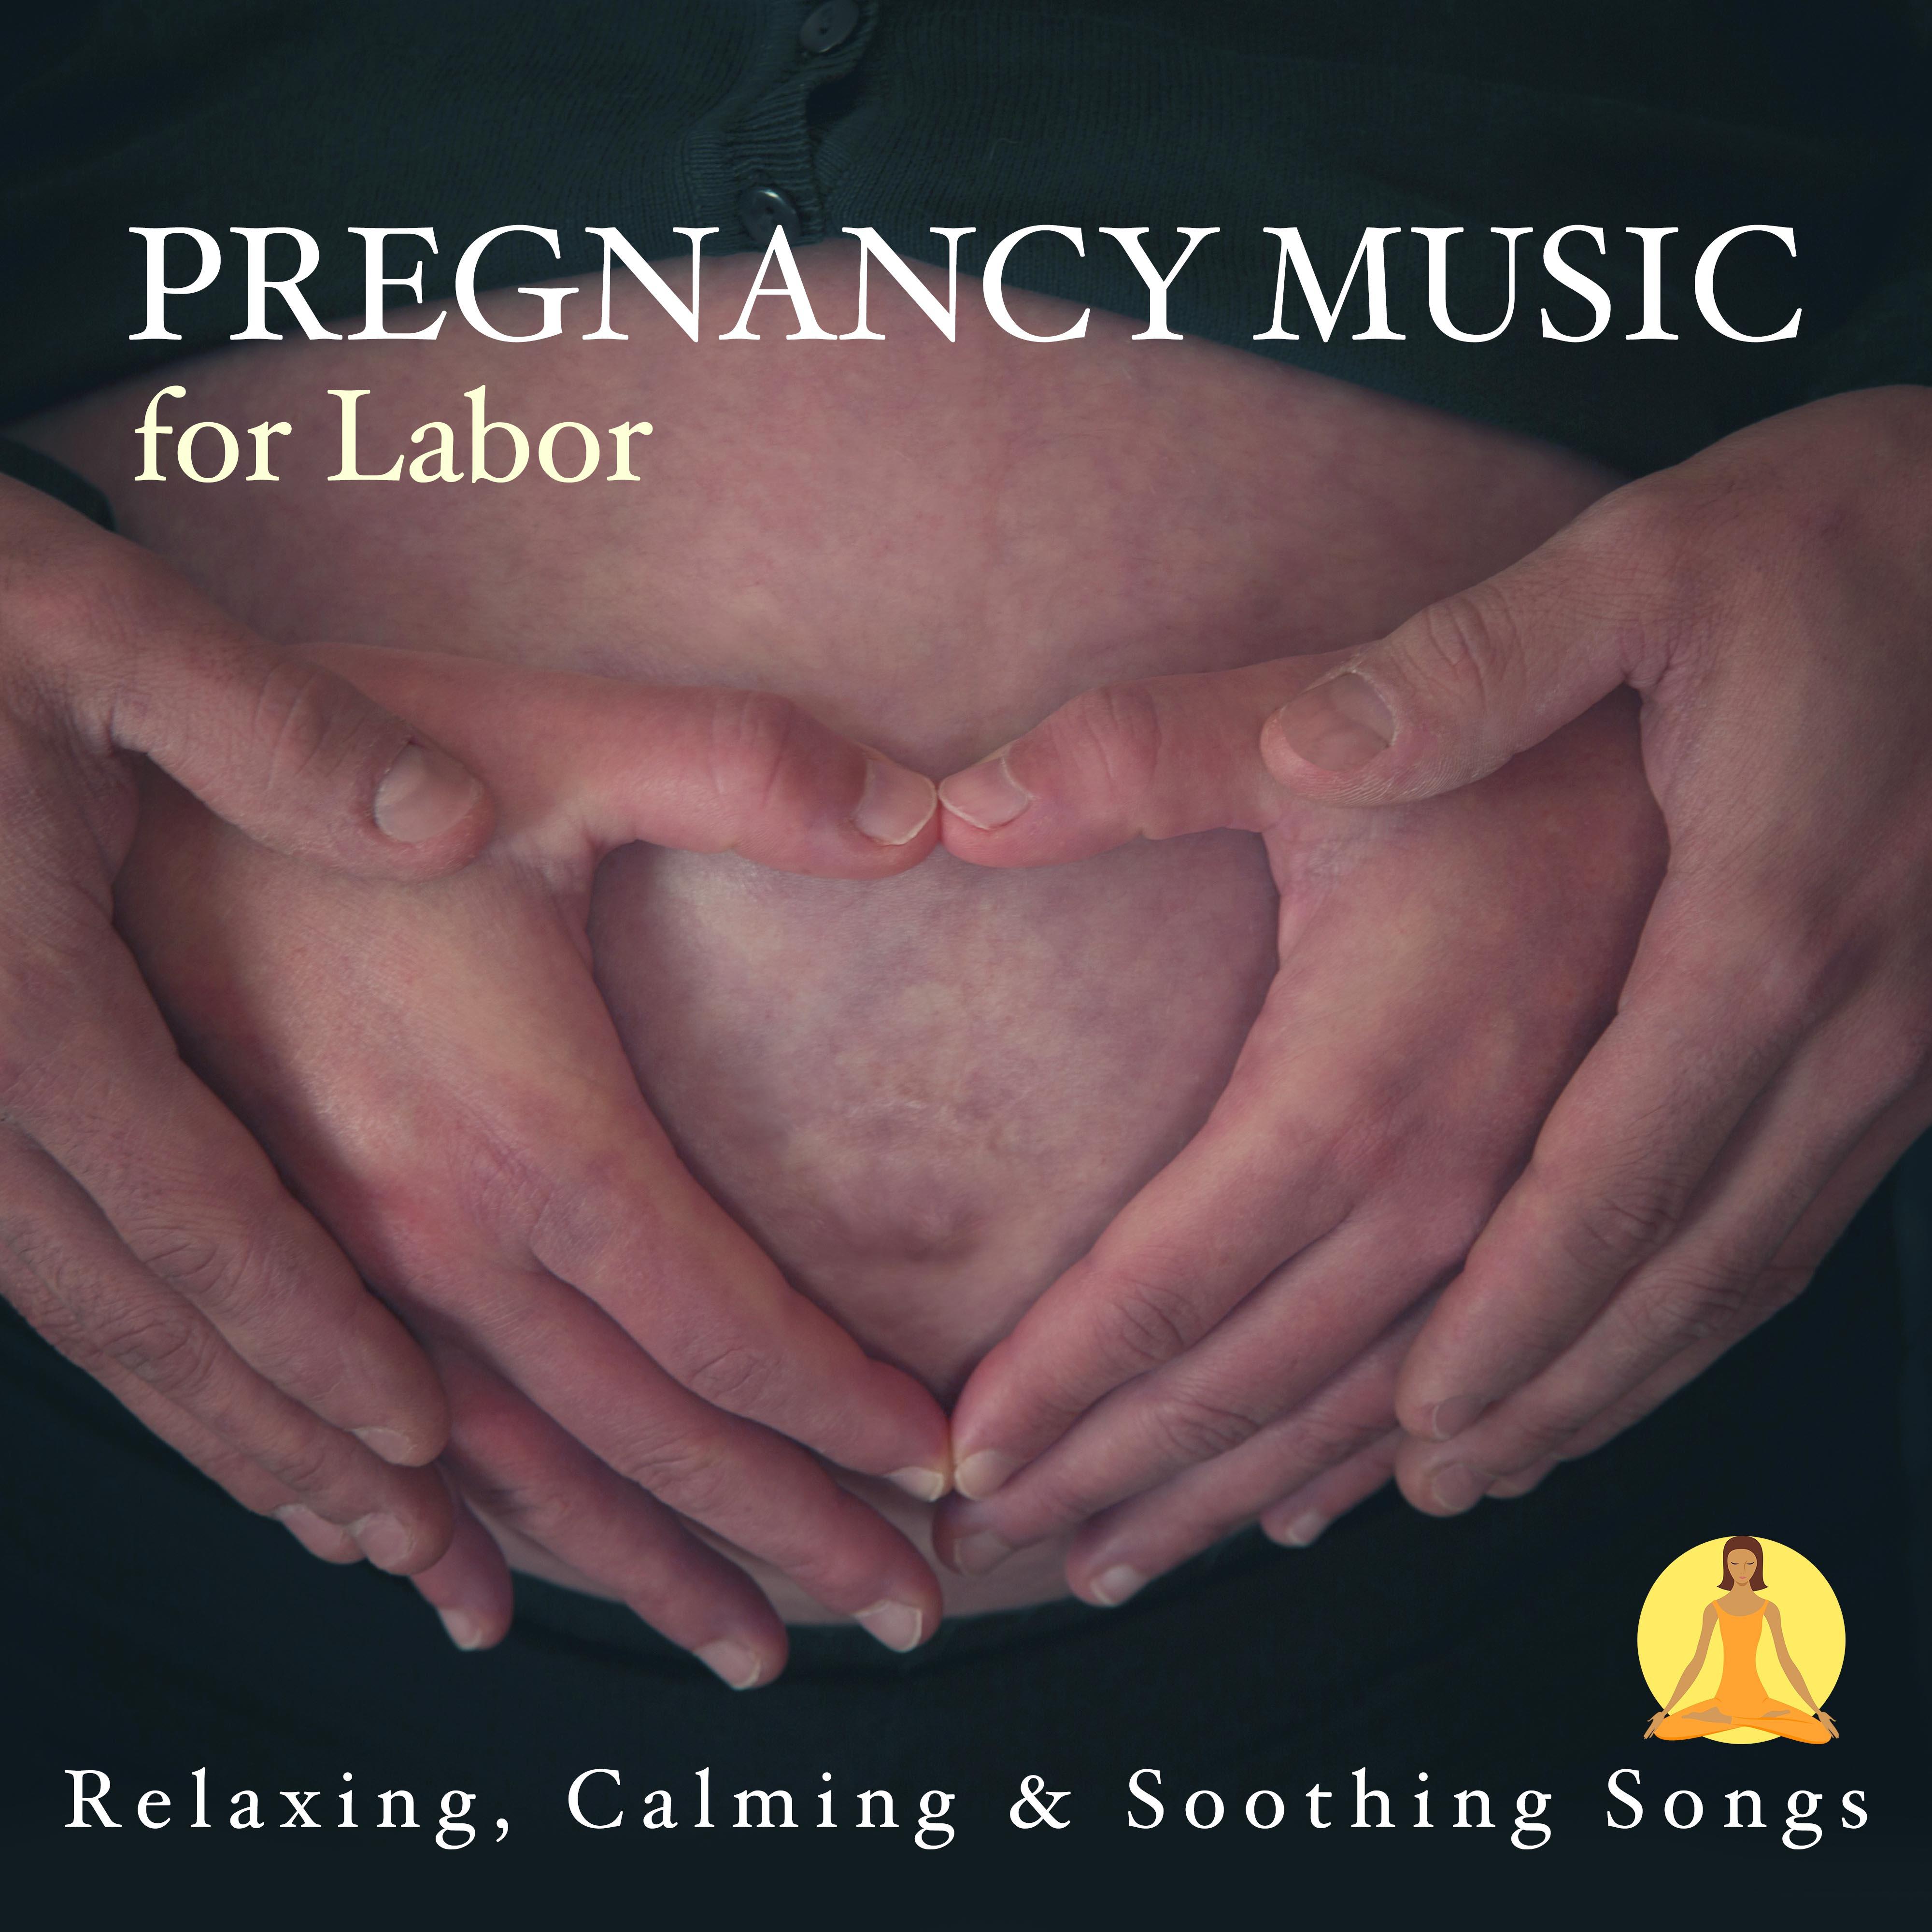 Pregnancy Music for Labor: Relaxing, Calming, Soothing Songs for Pregnant Mothers, Childbirth, Delivery & Sleeping Music Baby, New Age Meditation Relaxation Music